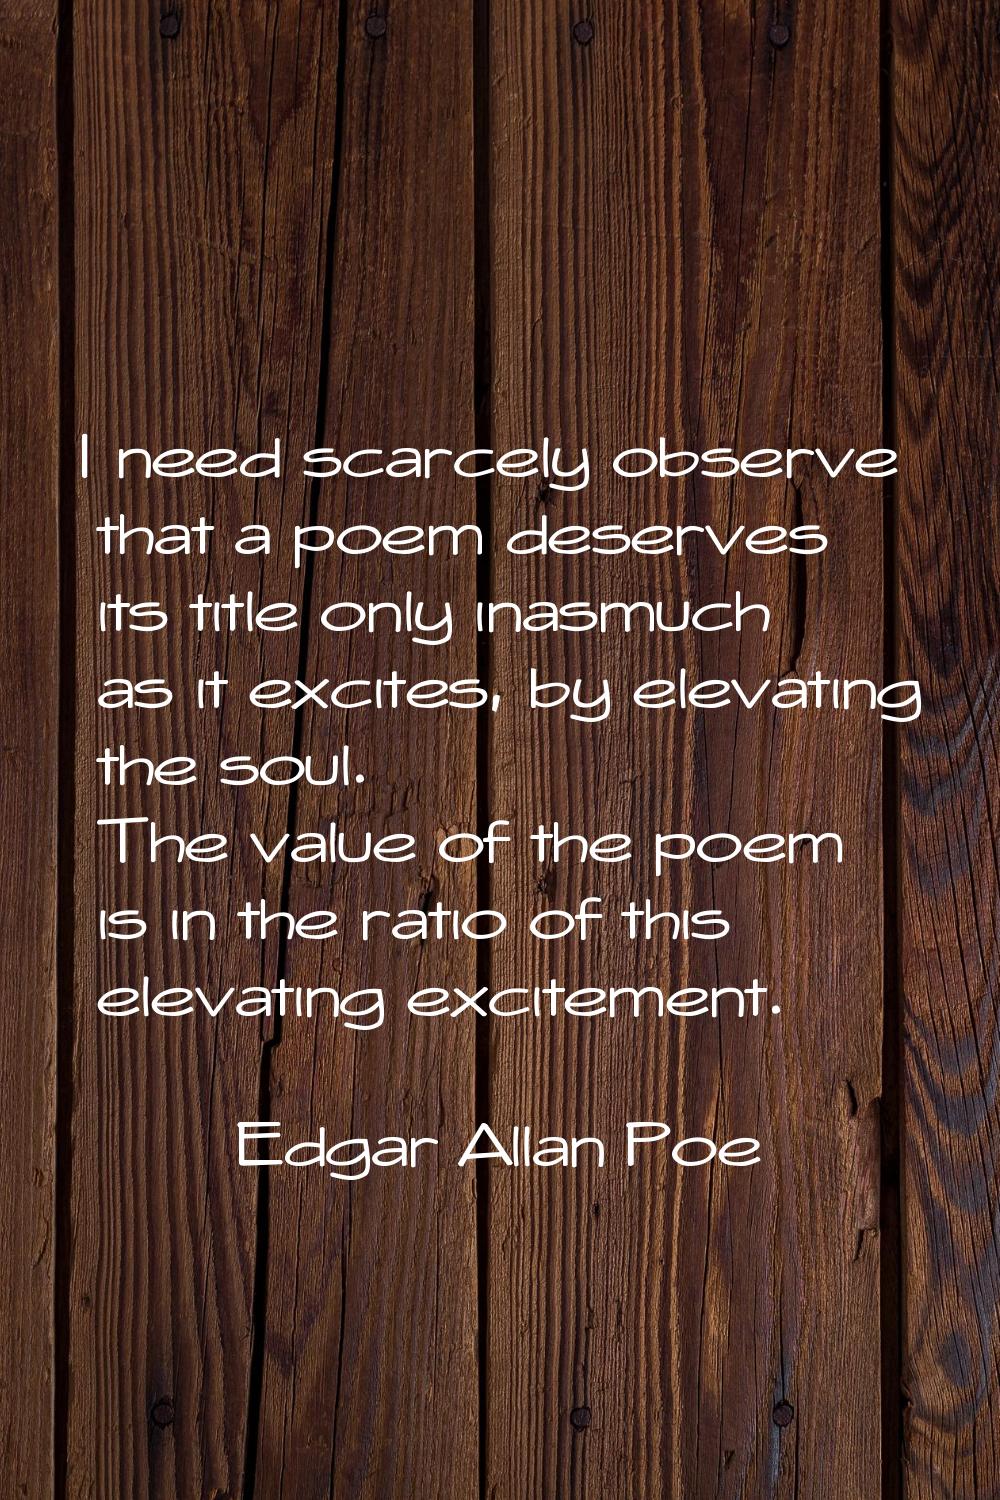 I need scarcely observe that a poem deserves its title only inasmuch as it excites, by elevating th